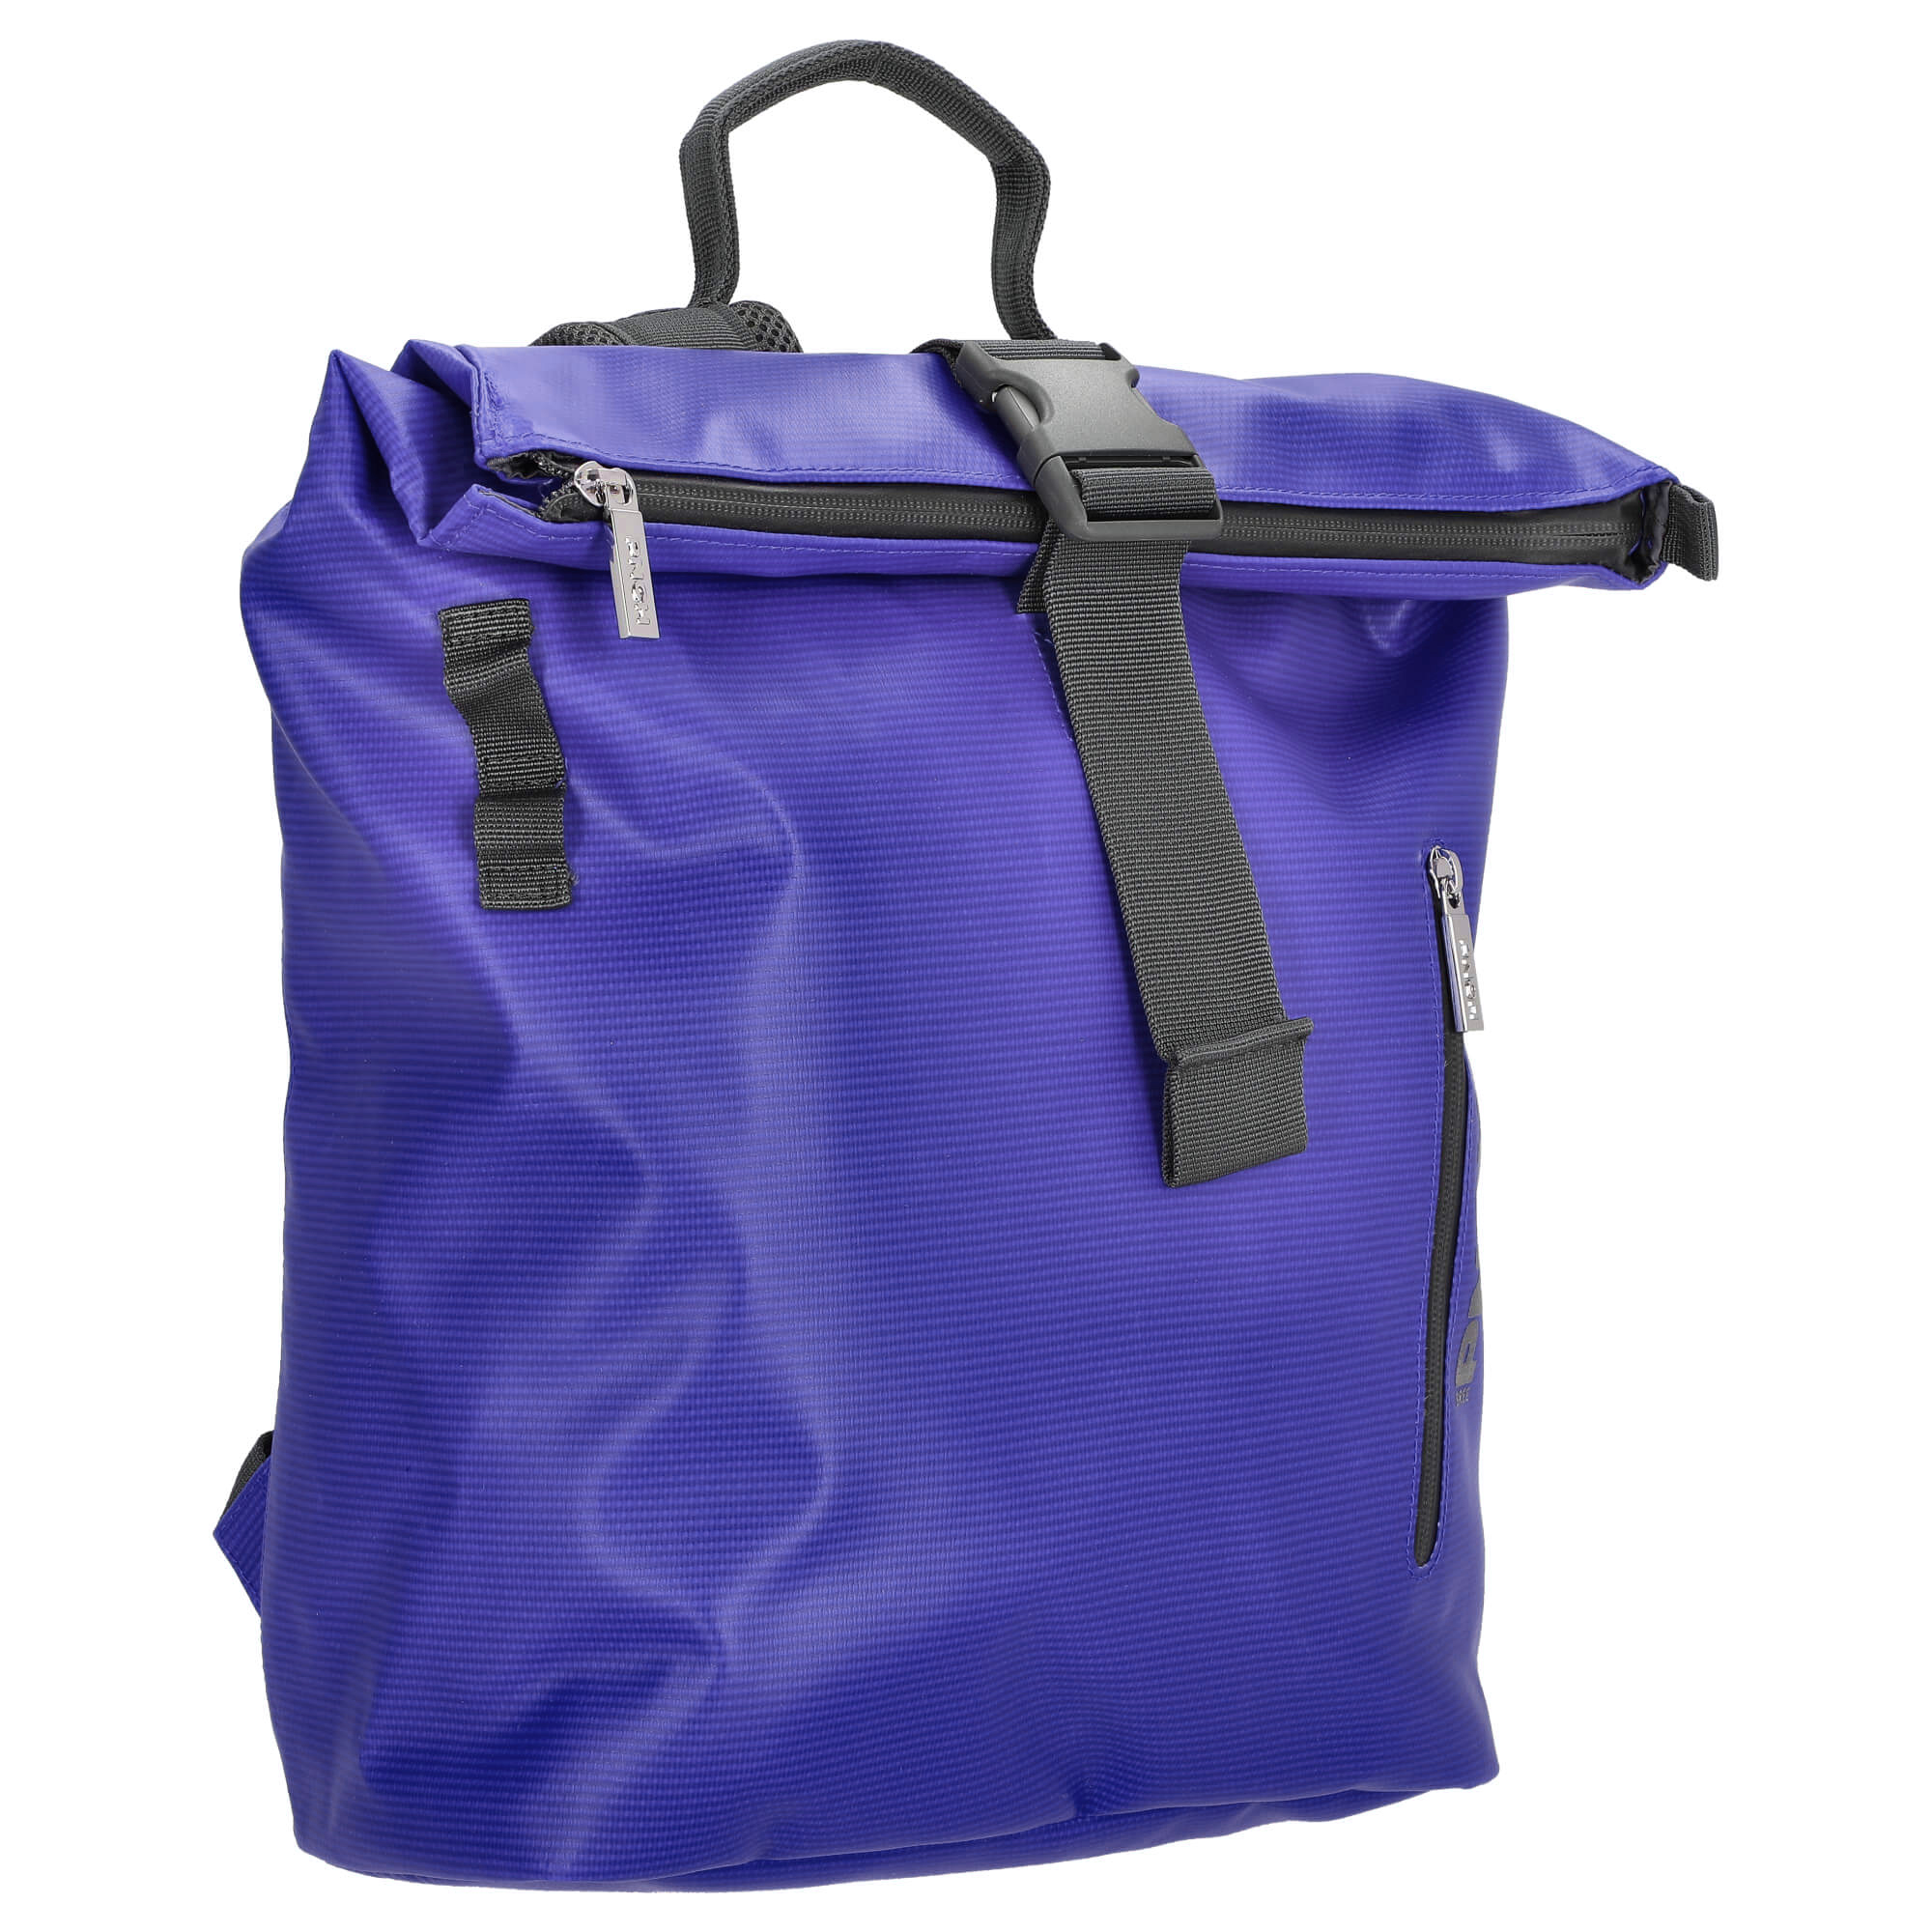 BREE PNCH 712 Rucksack - space blue